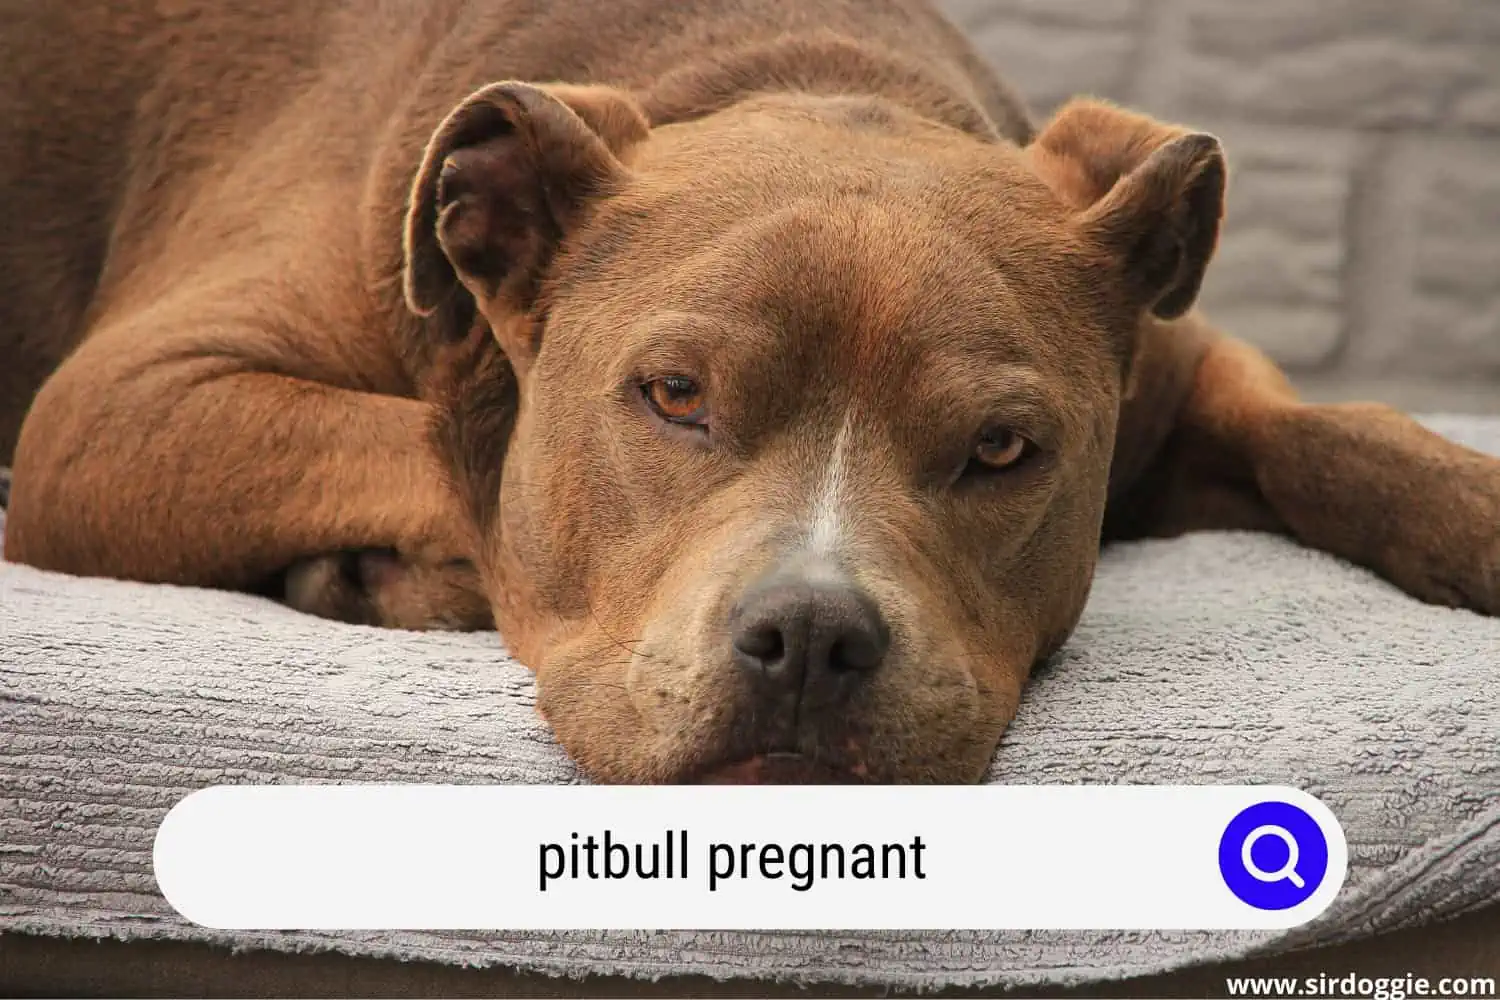 A pregnant Pitbull looking tired, lying in a couch